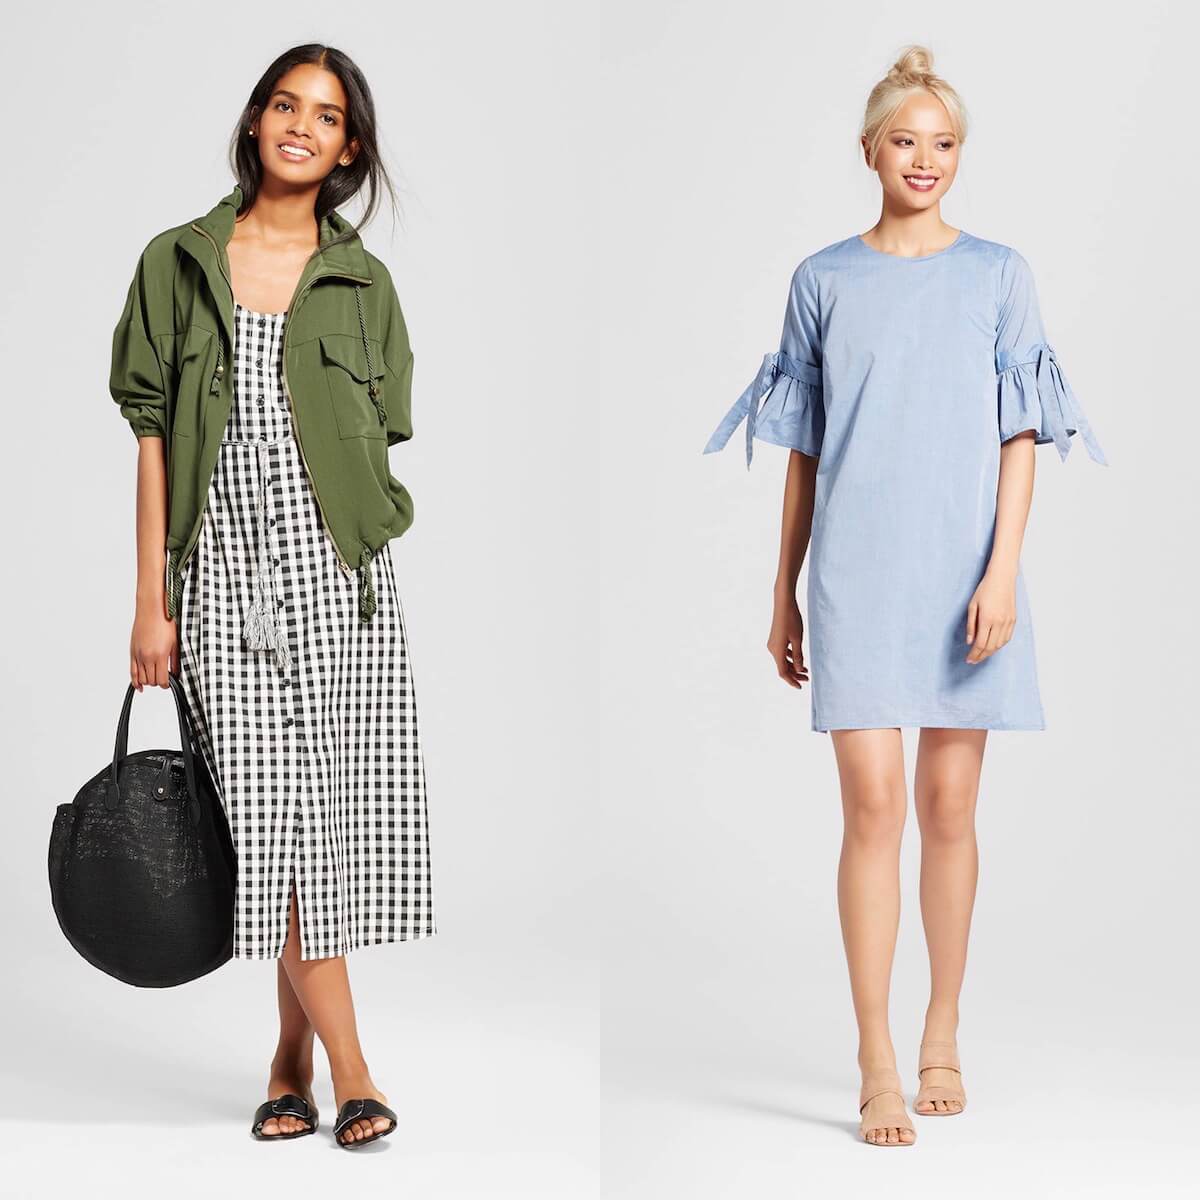 Two models wear Who What Wear brand dresses from Target